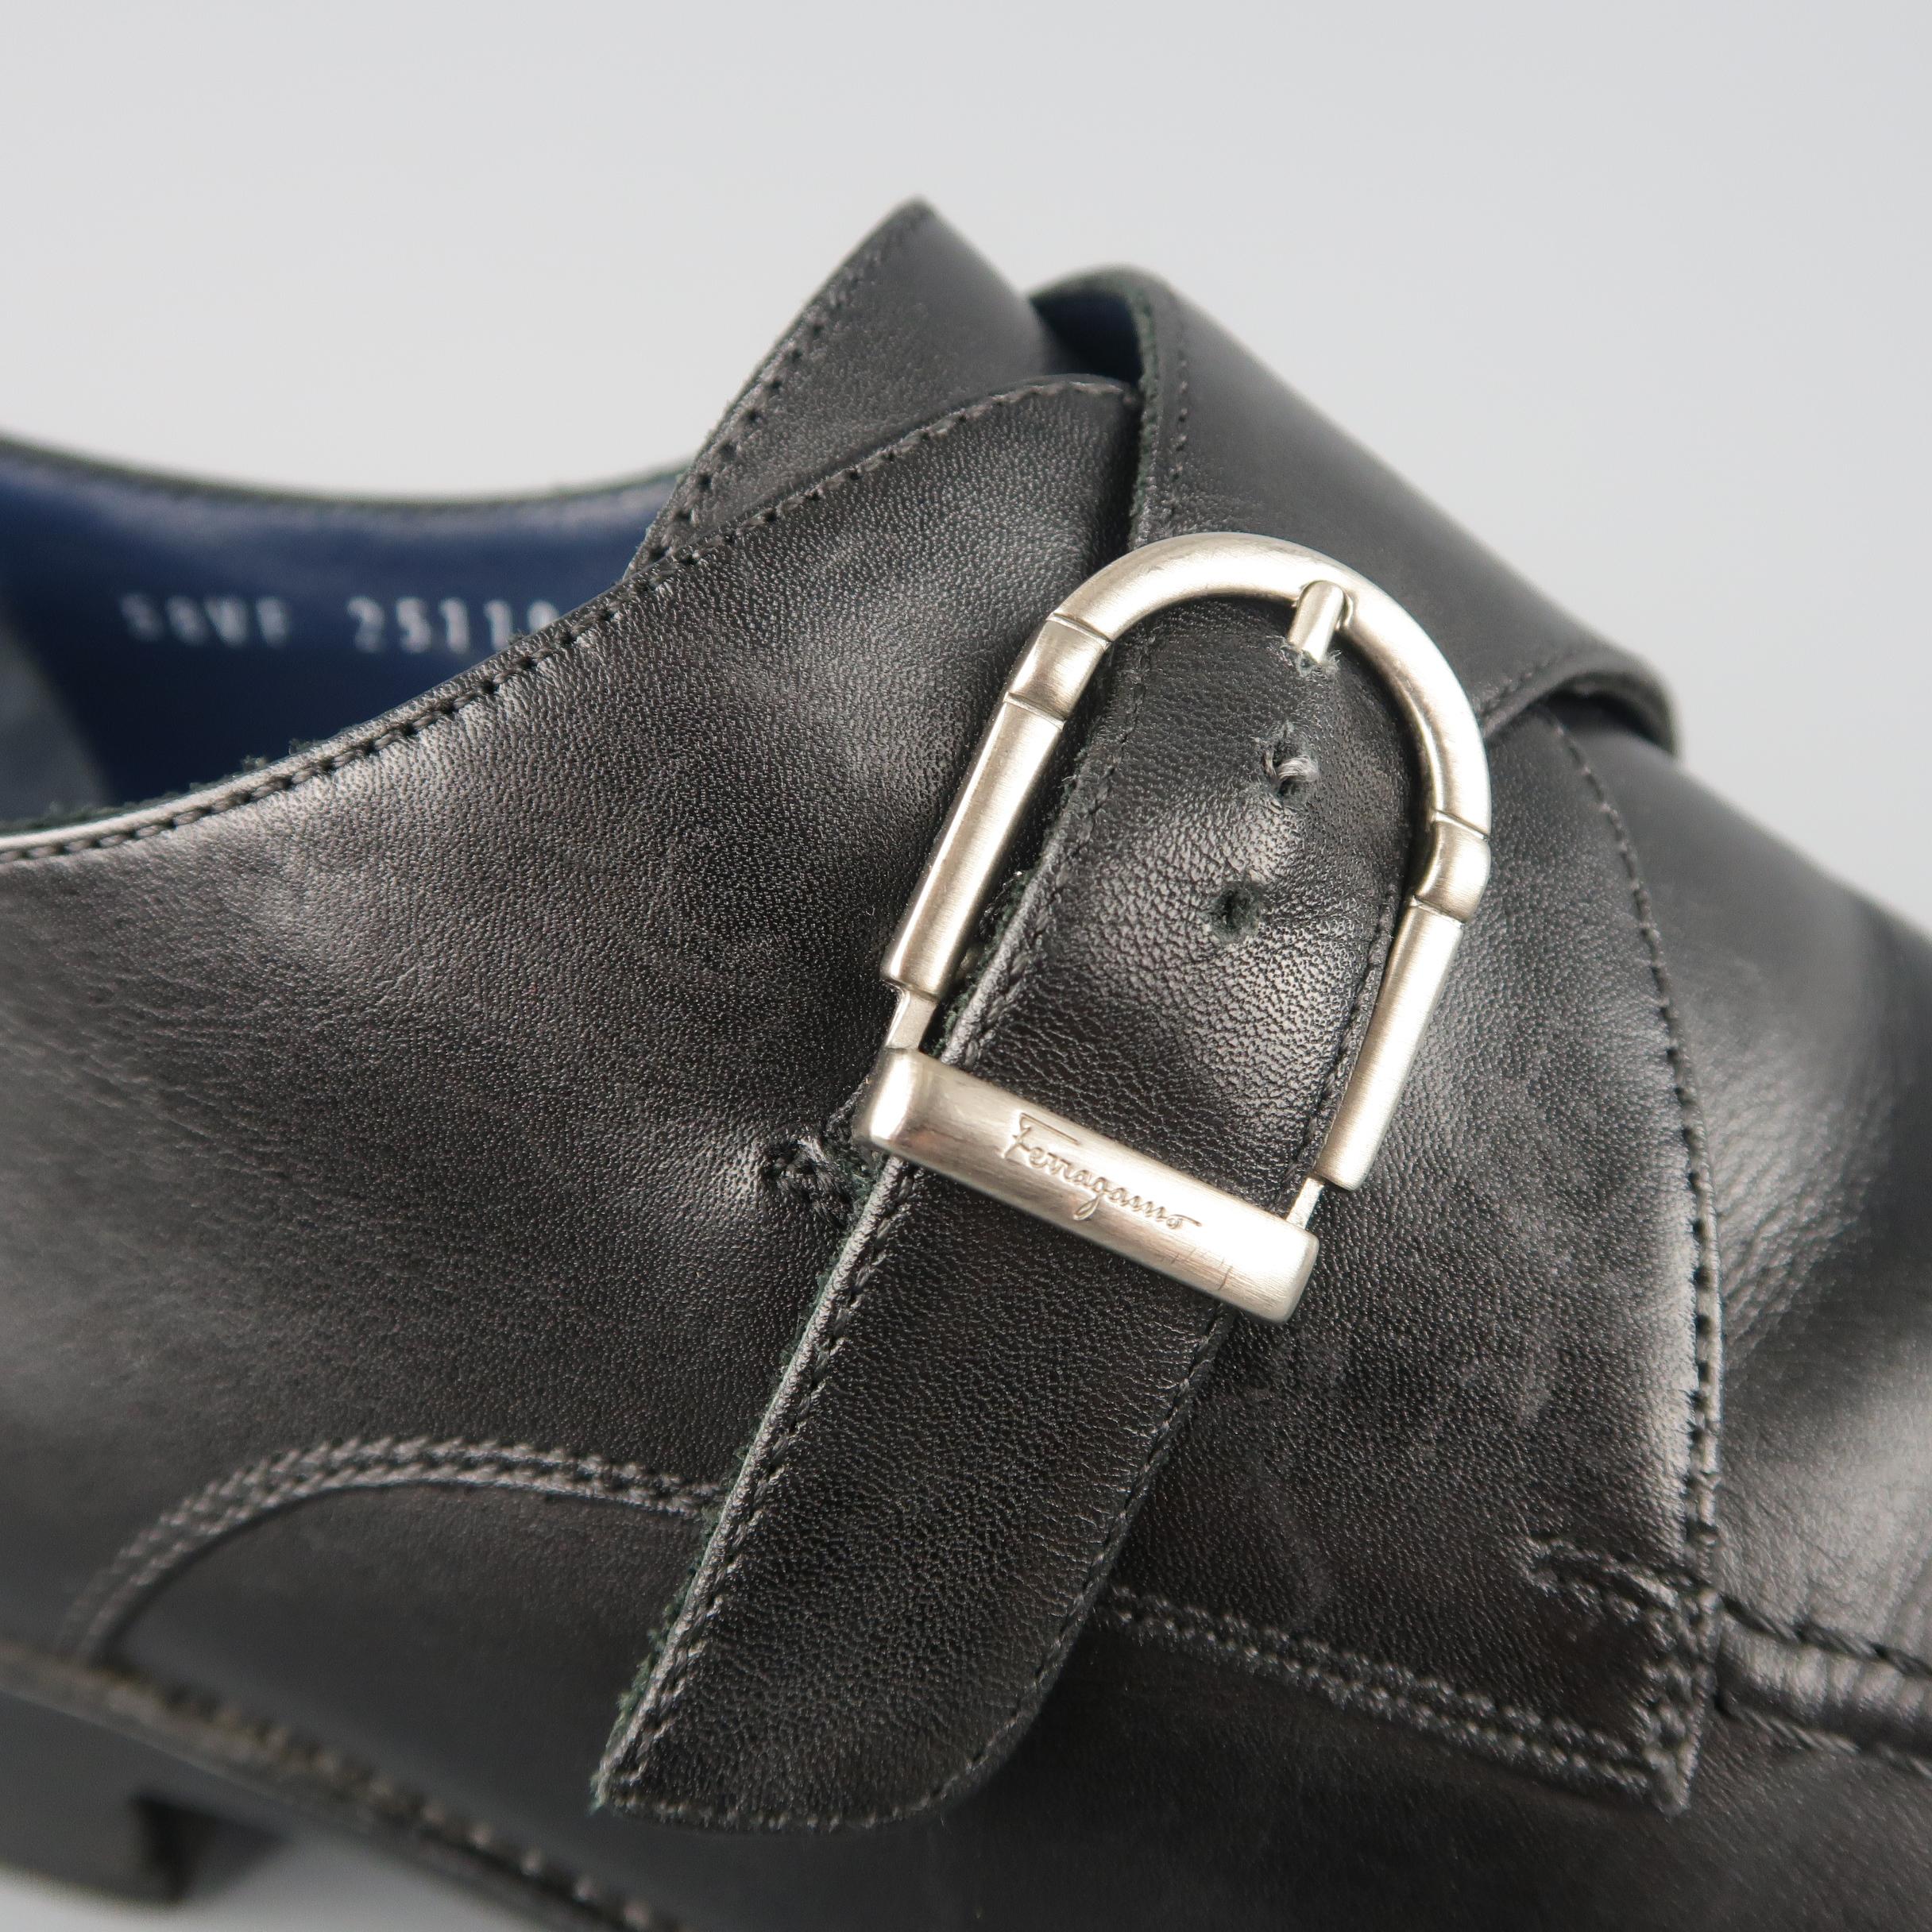 SALVATORE FERRAGAMO dress shoes come in smooth black leather with a pointed apron toe and monk strap with matte silver tone engraved buckle.  Made in Italy.
 
Good Pre-Owned Condition.
Marked: UK 10.5
 
Outsole: 12.5 x 4 in.